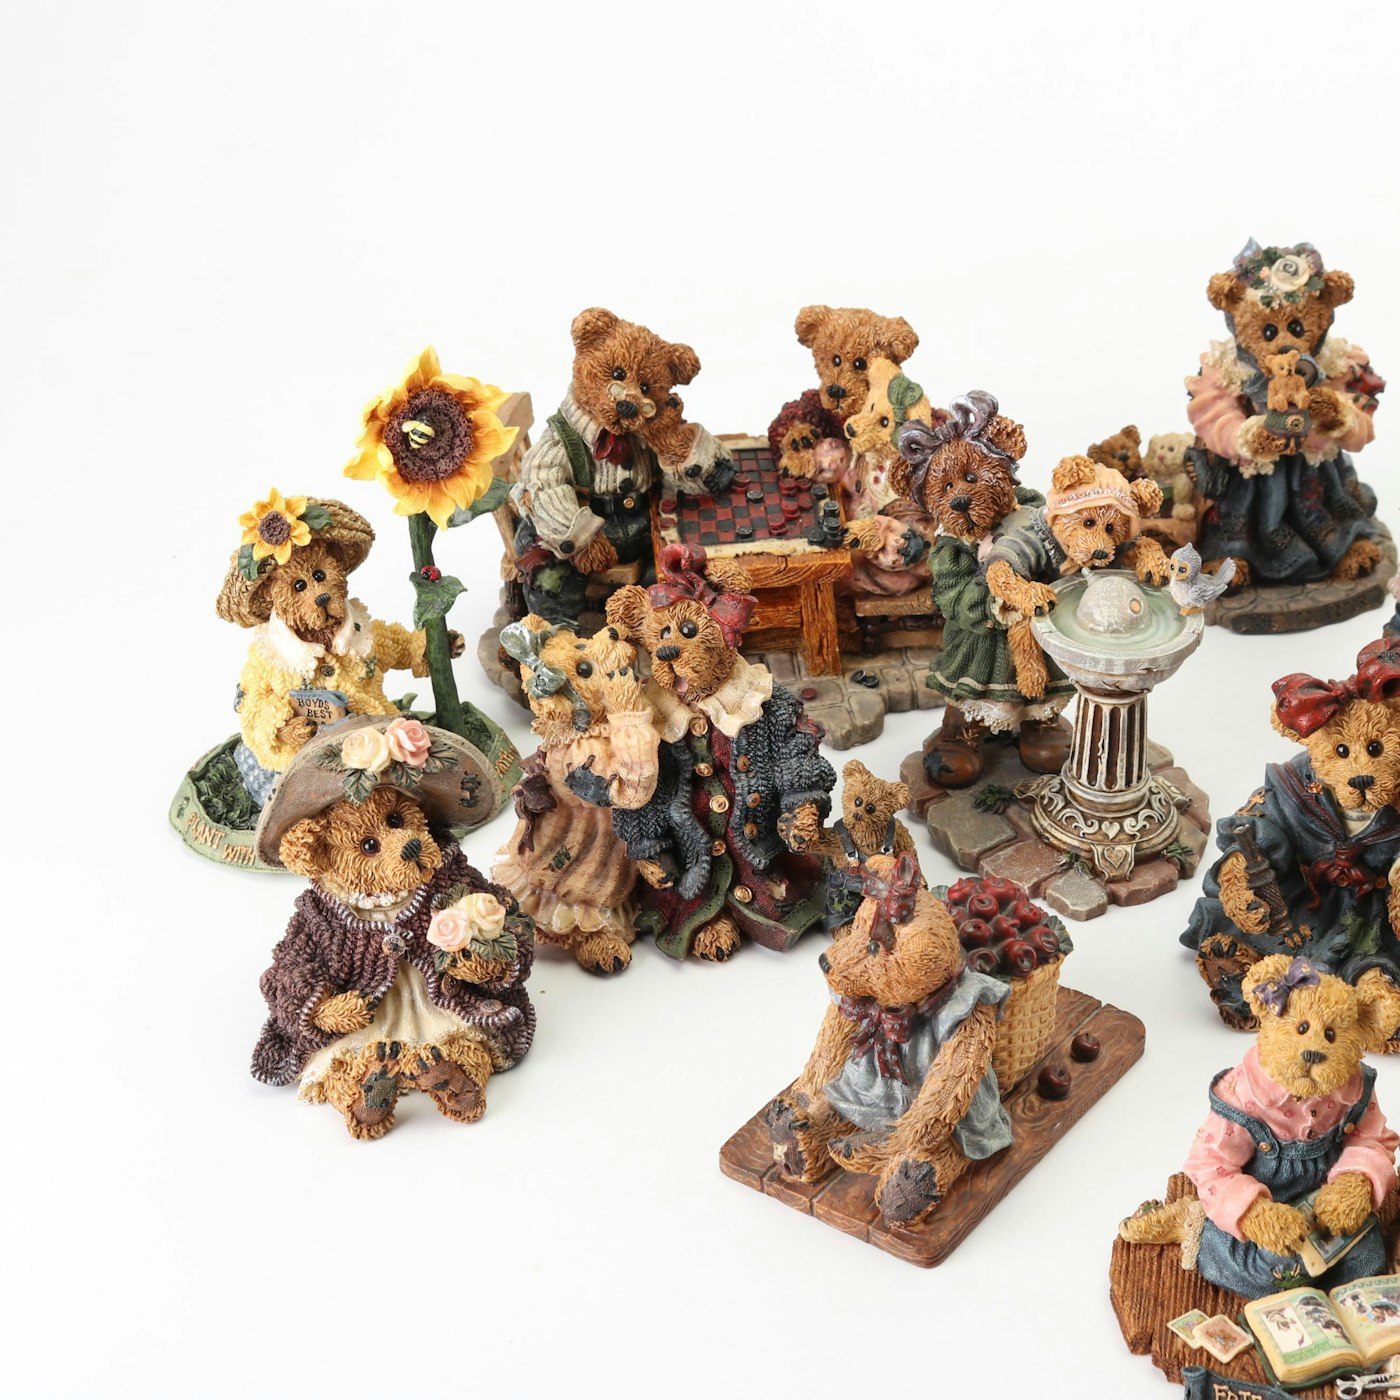 boyds bears & friends the bearstone collection